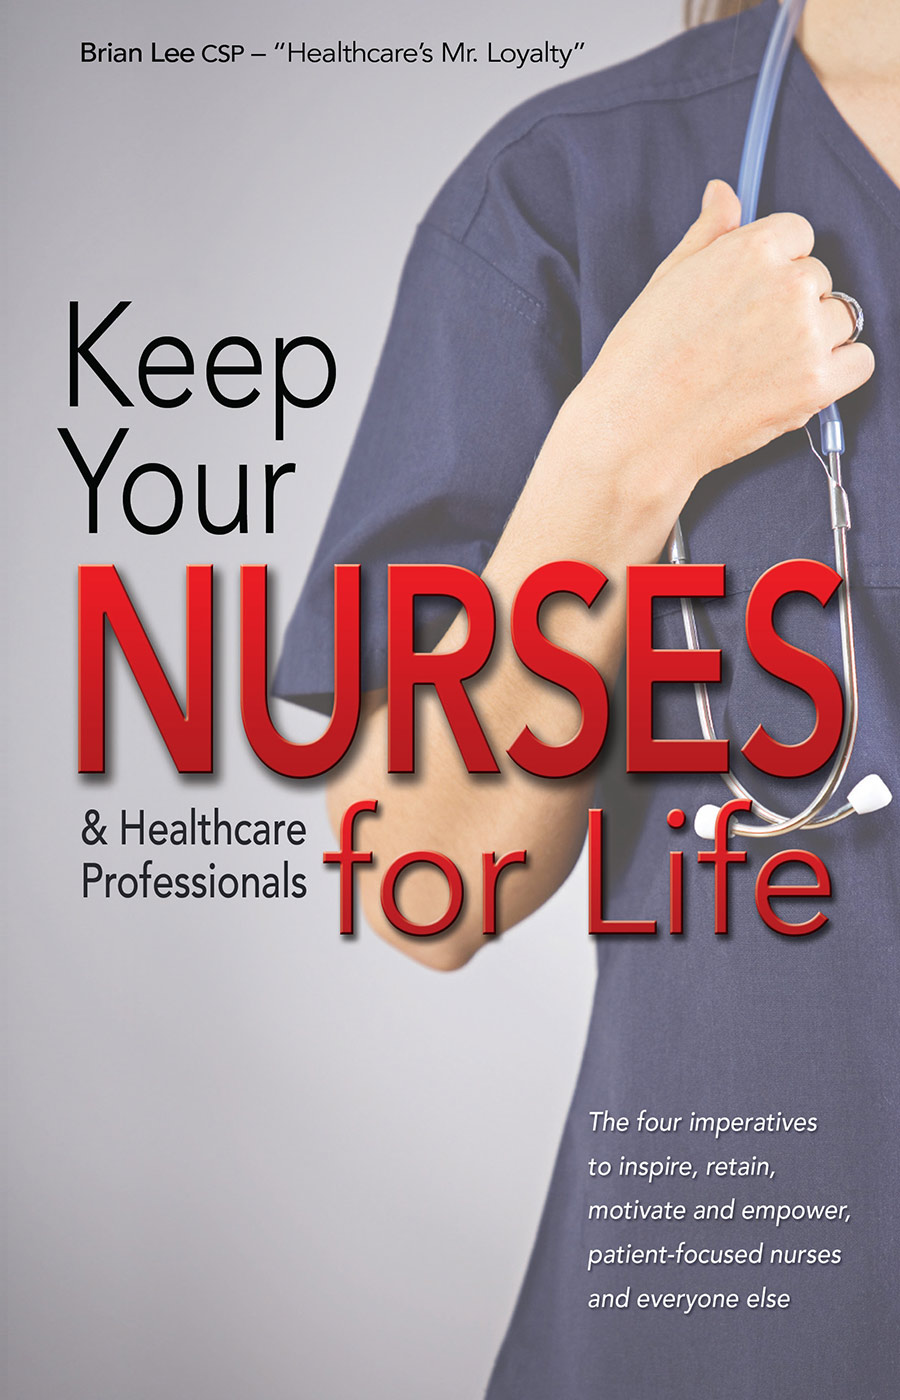 Keep Your Nurses & Healthcare Professionals for Life